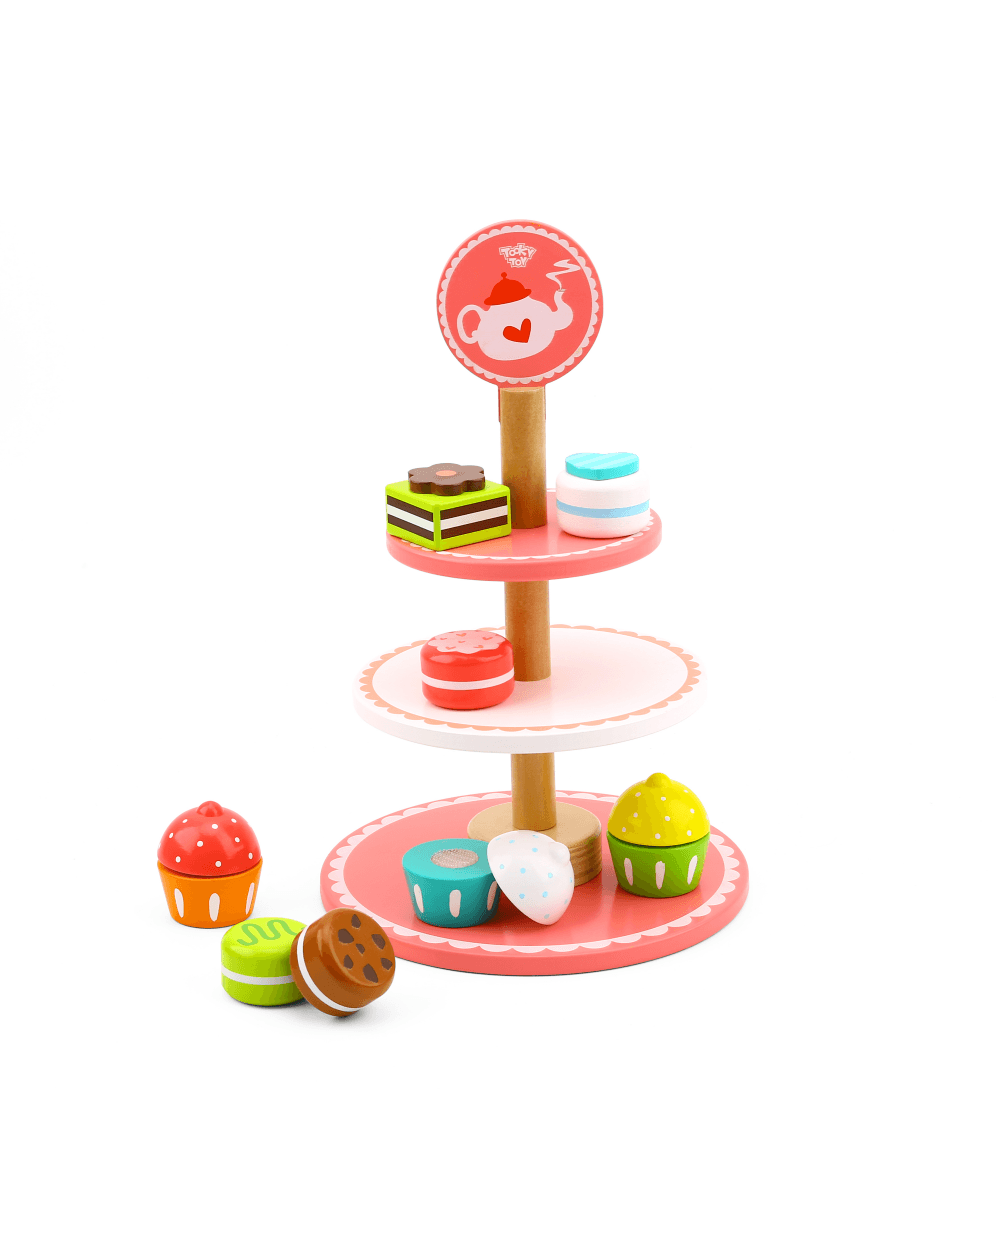 Tooky Toy Dessert Stand